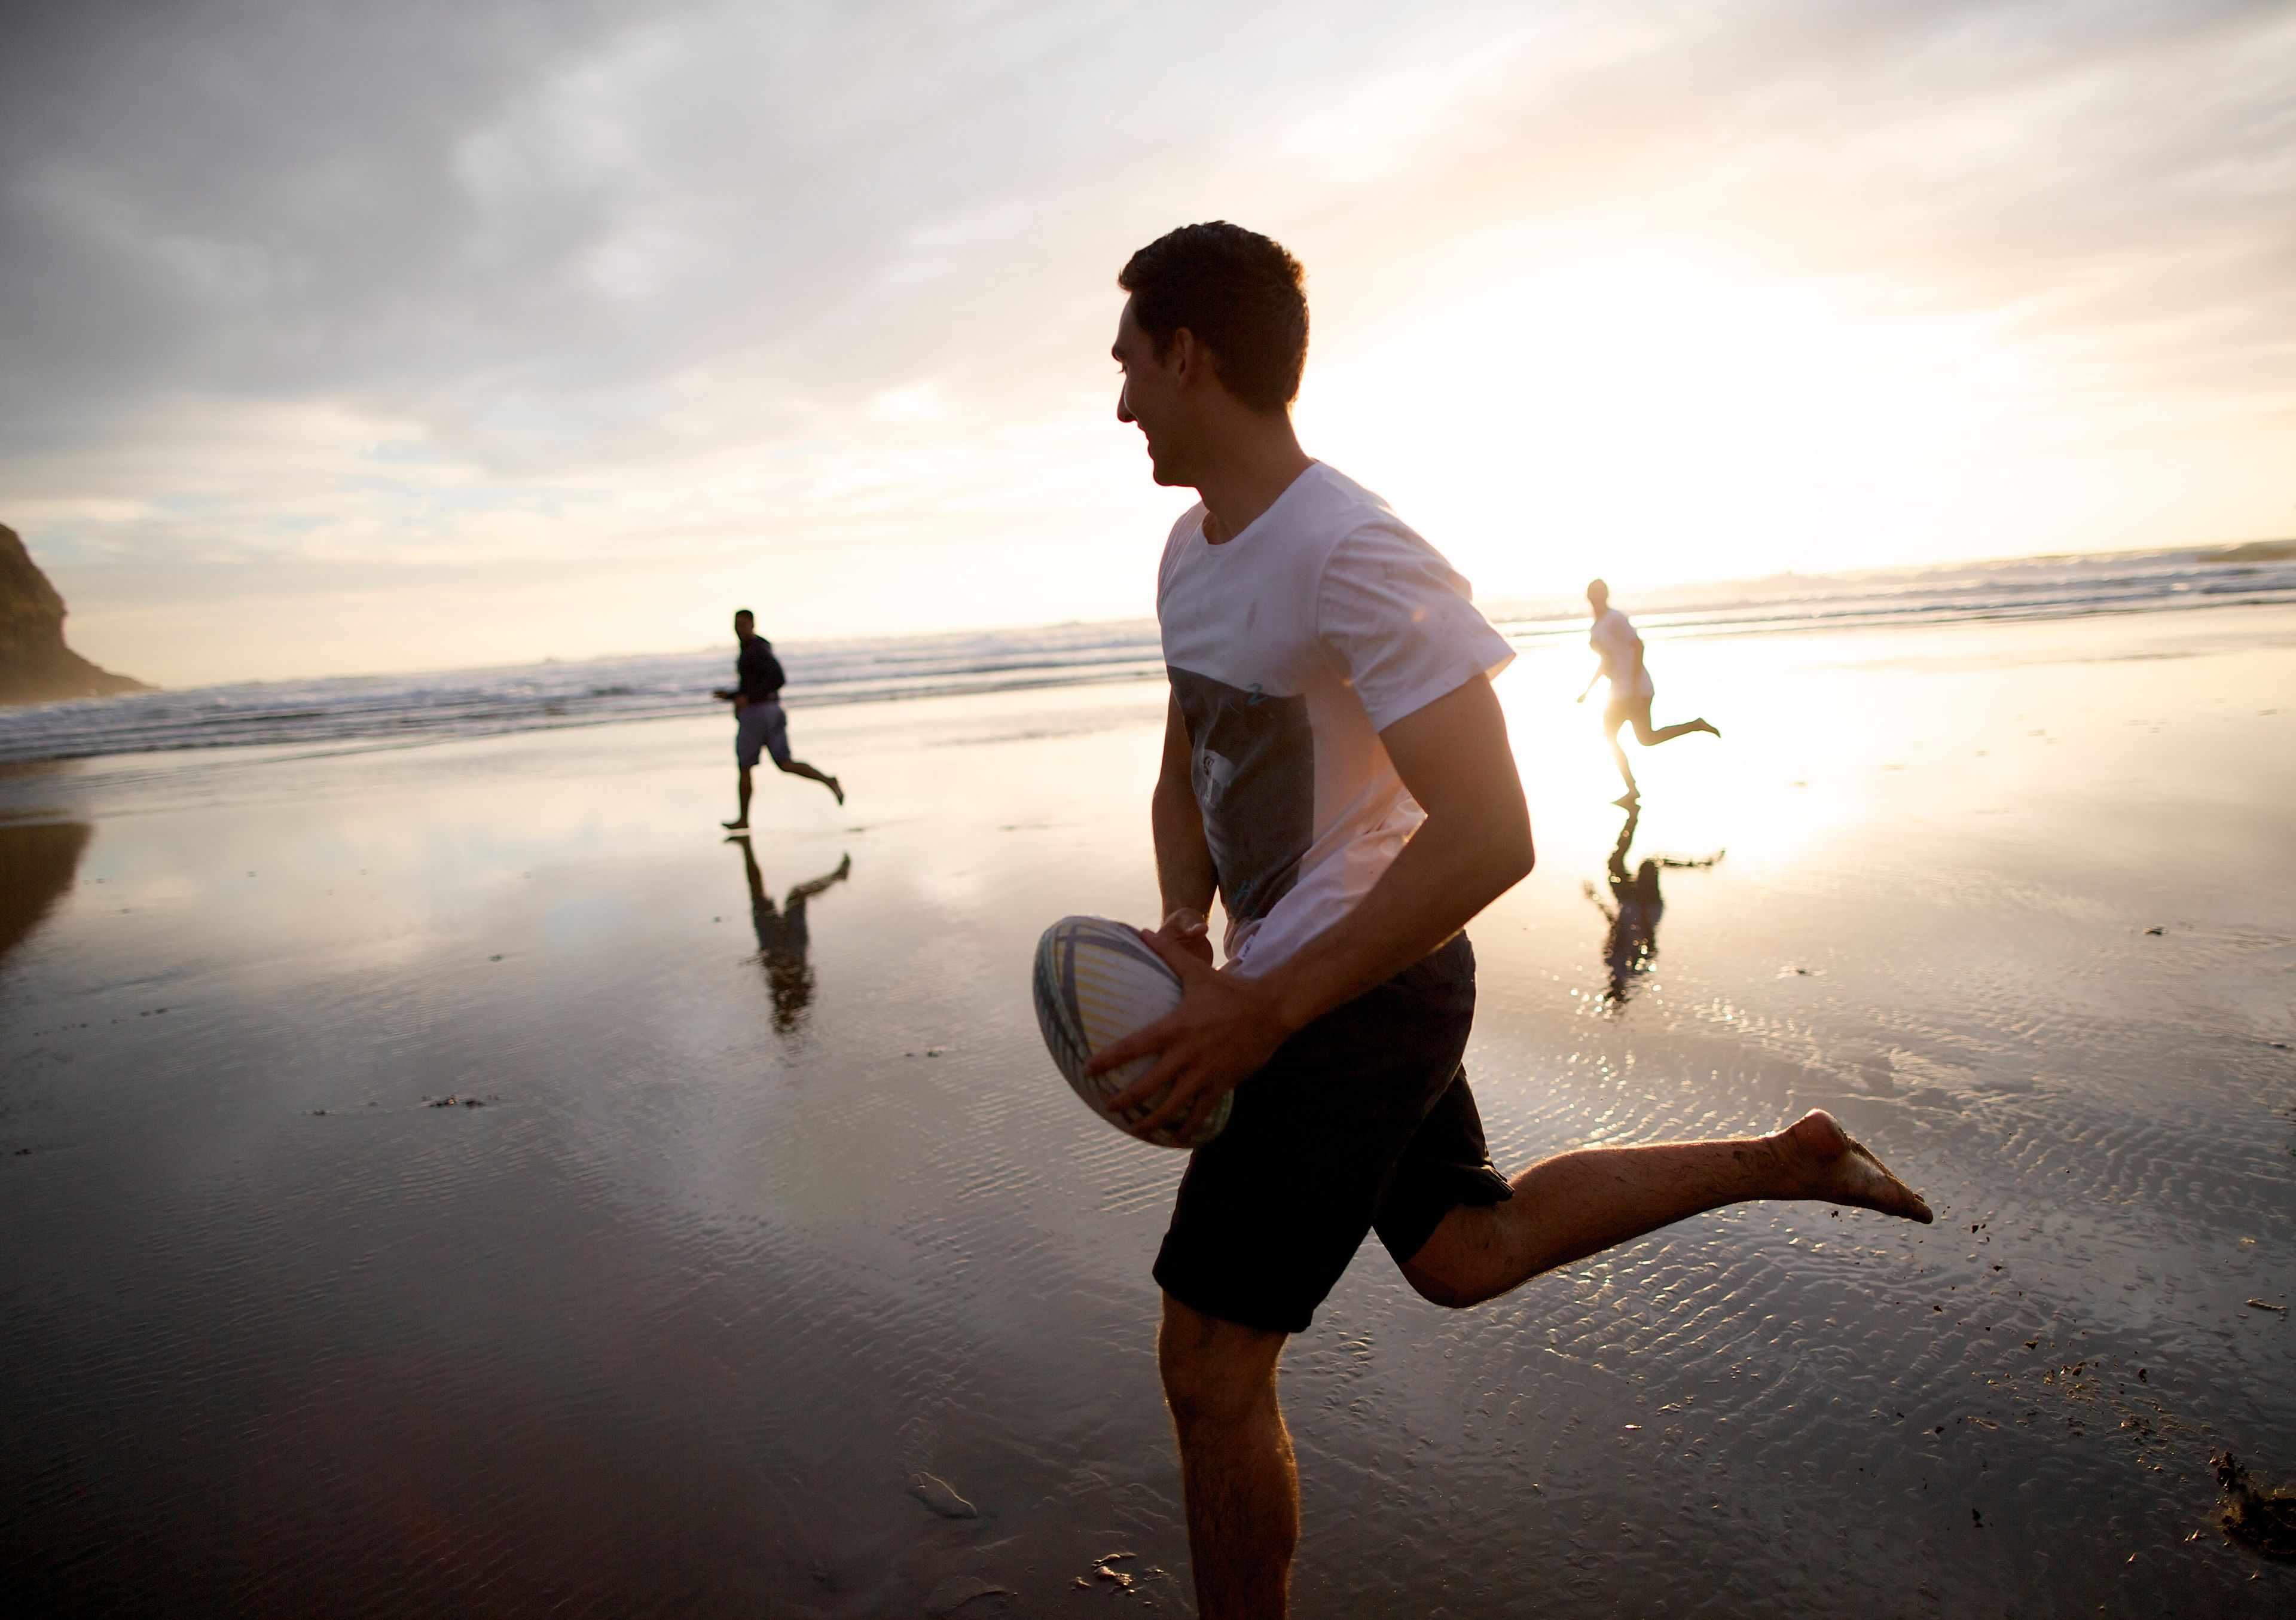 A young man playing rugby on the beach, running with the ball as the sun sets.  